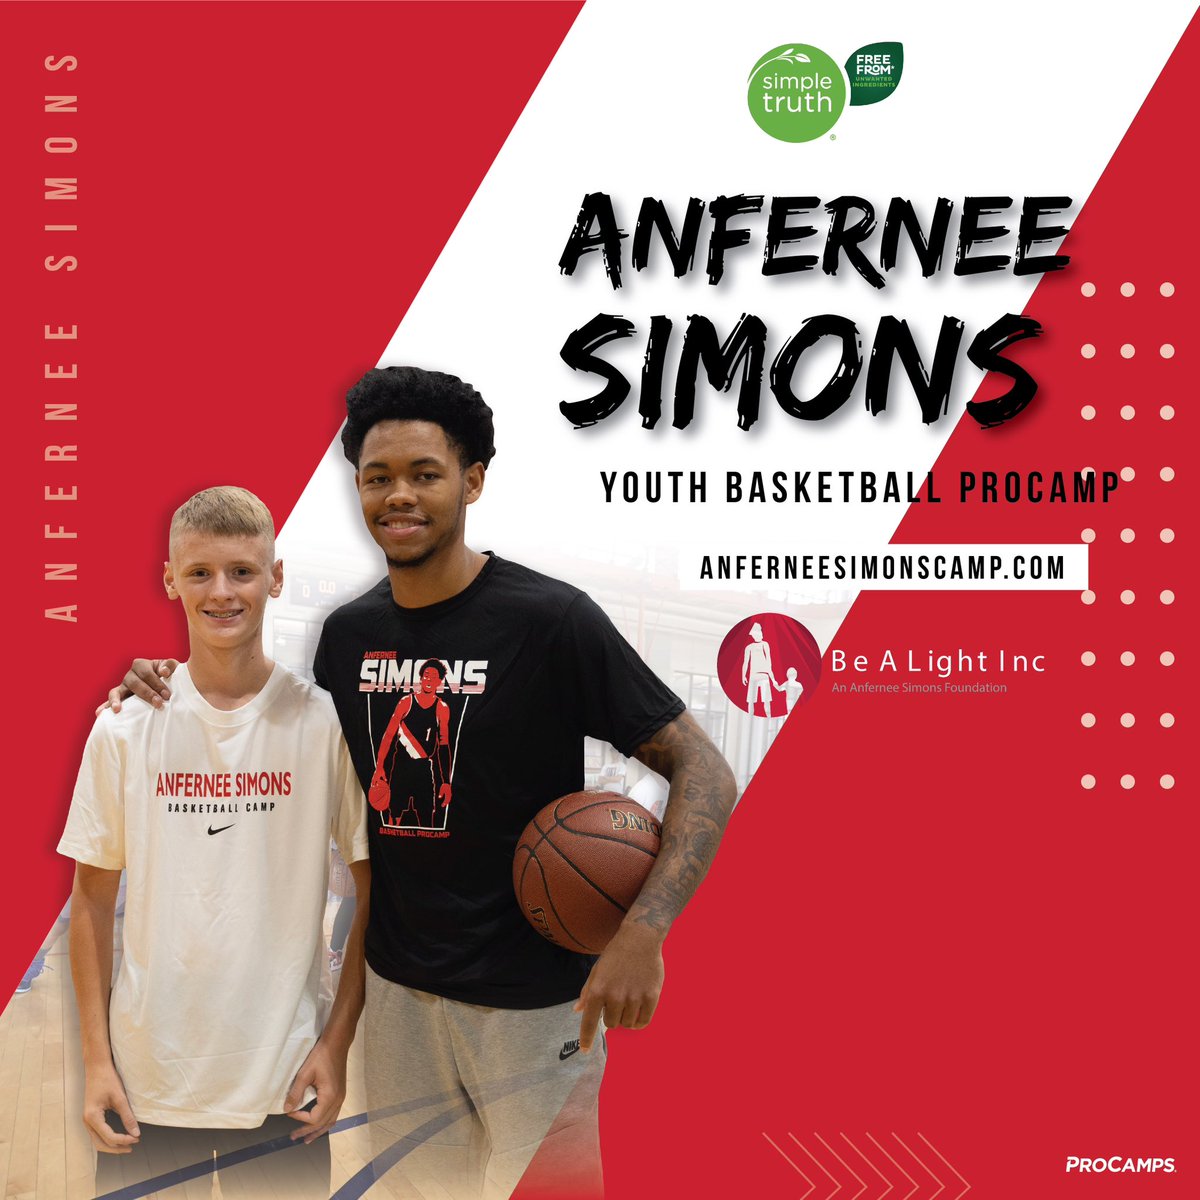 RIP CITY! 🏀 🔥 Don’t miss the chance to take the court with @AnferneeSimons ‼️ Registration for the @SimpleTruth4U Anfernee Simons youth basketball ProCamp is officially OPEN! 🔗 Secure your spot today at anferneesimonscamp.com